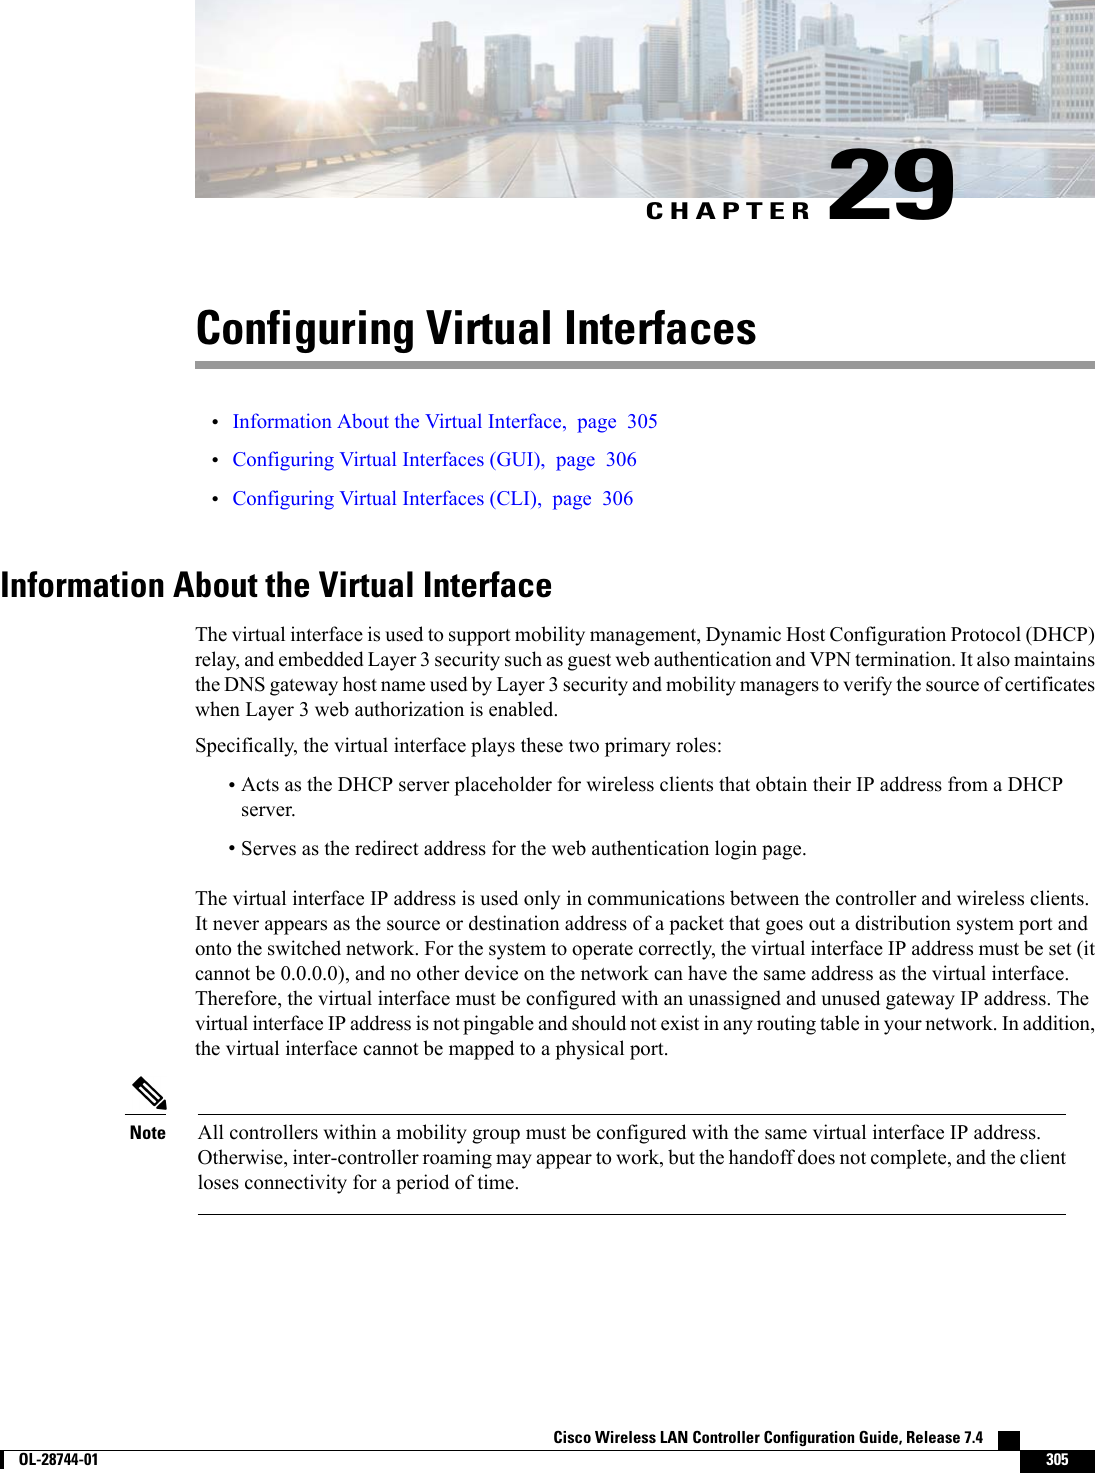 CHAPTER 29Configuring Virtual Interfaces•Information About the Virtual Interface, page 305•Configuring Virtual Interfaces (GUI), page 306•Configuring Virtual Interfaces (CLI), page 306Information About the Virtual InterfaceThe virtual interface is used to support mobility management, Dynamic Host Configuration Protocol (DHCP)relay, and embedded Layer 3 security such as guest web authentication and VPN termination. It also maintainsthe DNS gateway host name used by Layer 3 security and mobility managers to verify the source of certificateswhen Layer 3 web authorization is enabled.Specifically, the virtual interface plays these two primary roles:•Acts as the DHCP server placeholder for wireless clients that obtain their IP address from a DHCPserver.•Serves as the redirect address for the web authentication login page.The virtual interface IP address is used only in communications between the controller and wireless clients.It never appears as the source or destination address of a packet that goes out a distribution system port andonto the switched network. For the system to operate correctly, the virtual interface IP address must be set (itcannot be 0.0.0.0), and no other device on the network can have the same address as the virtual interface.Therefore, the virtual interface must be configured with an unassigned and unused gateway IP address. Thevirtual interface IP address is not pingable and should not exist in any routing table in your network. In addition,the virtual interface cannot be mapped to a physical port.All controllers within a mobility group must be configured with the same virtual interface IP address.Otherwise, inter-controller roaming may appear to work, but the handoff does not complete, and the clientloses connectivity for a period of time.NoteCisco Wireless LAN Controller Configuration Guide, Release 7.4        OL-28744-01 305